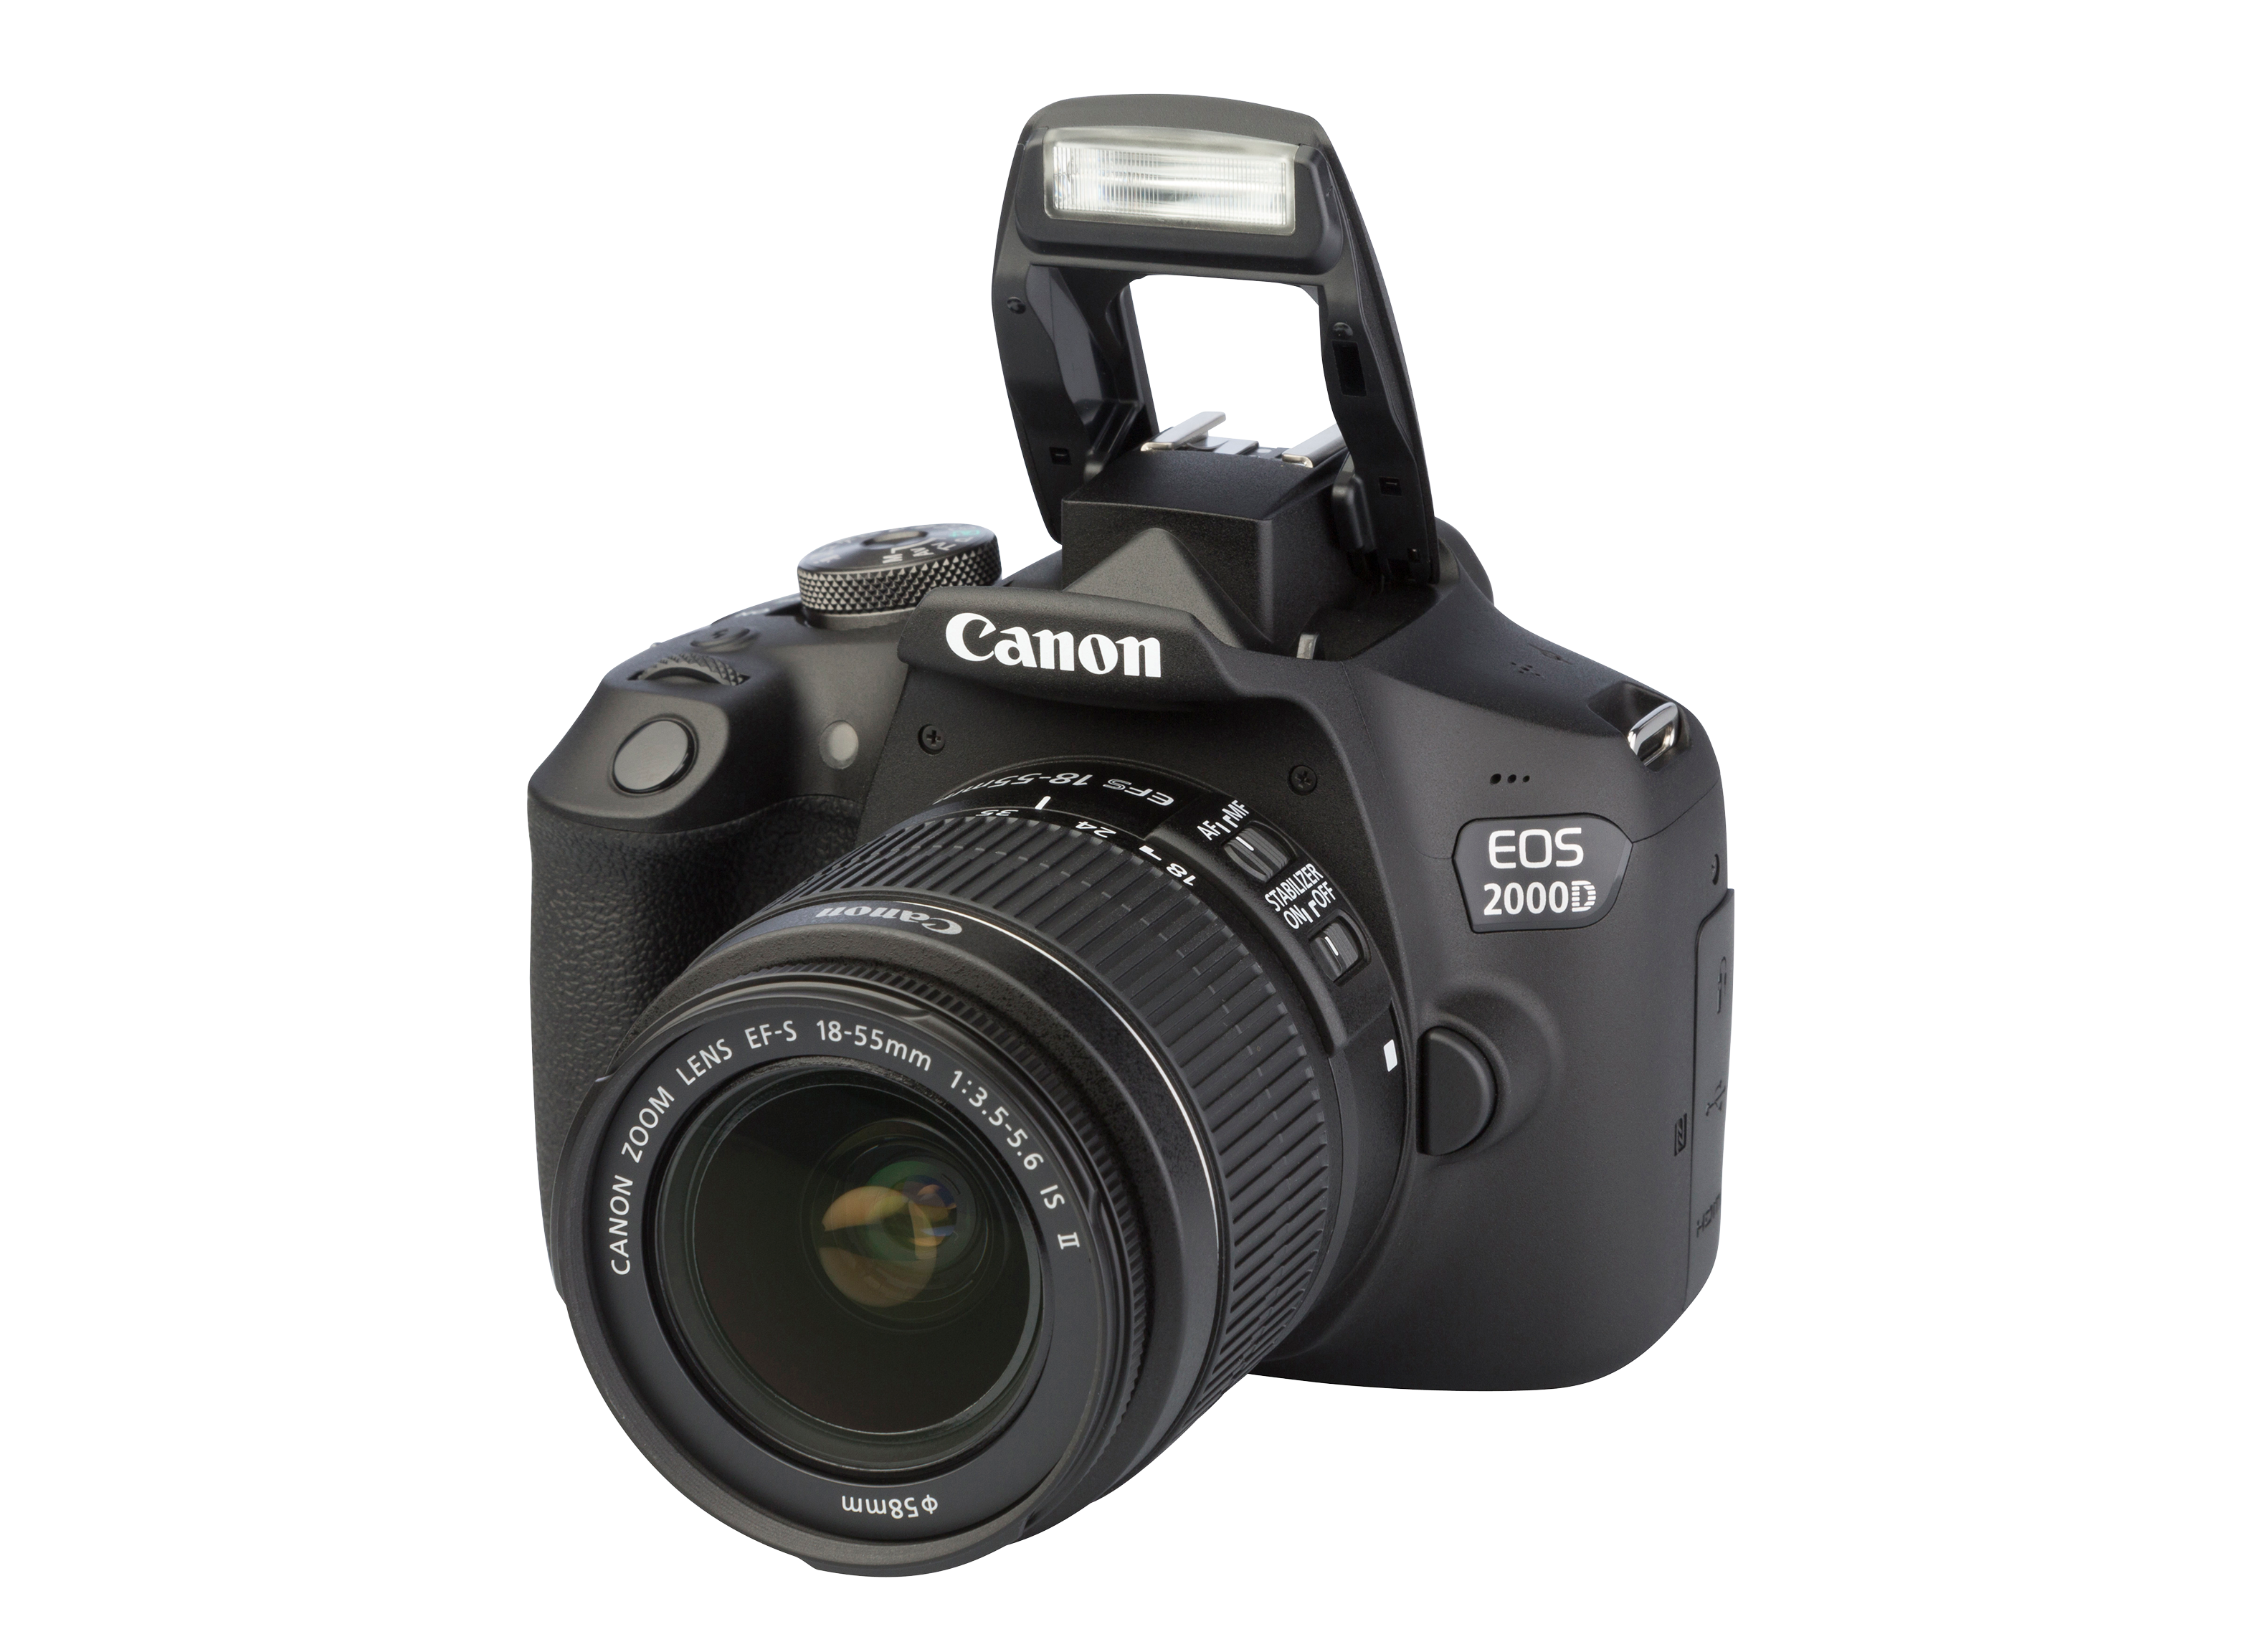 Canon EOS 2000D / Rebel T7 review